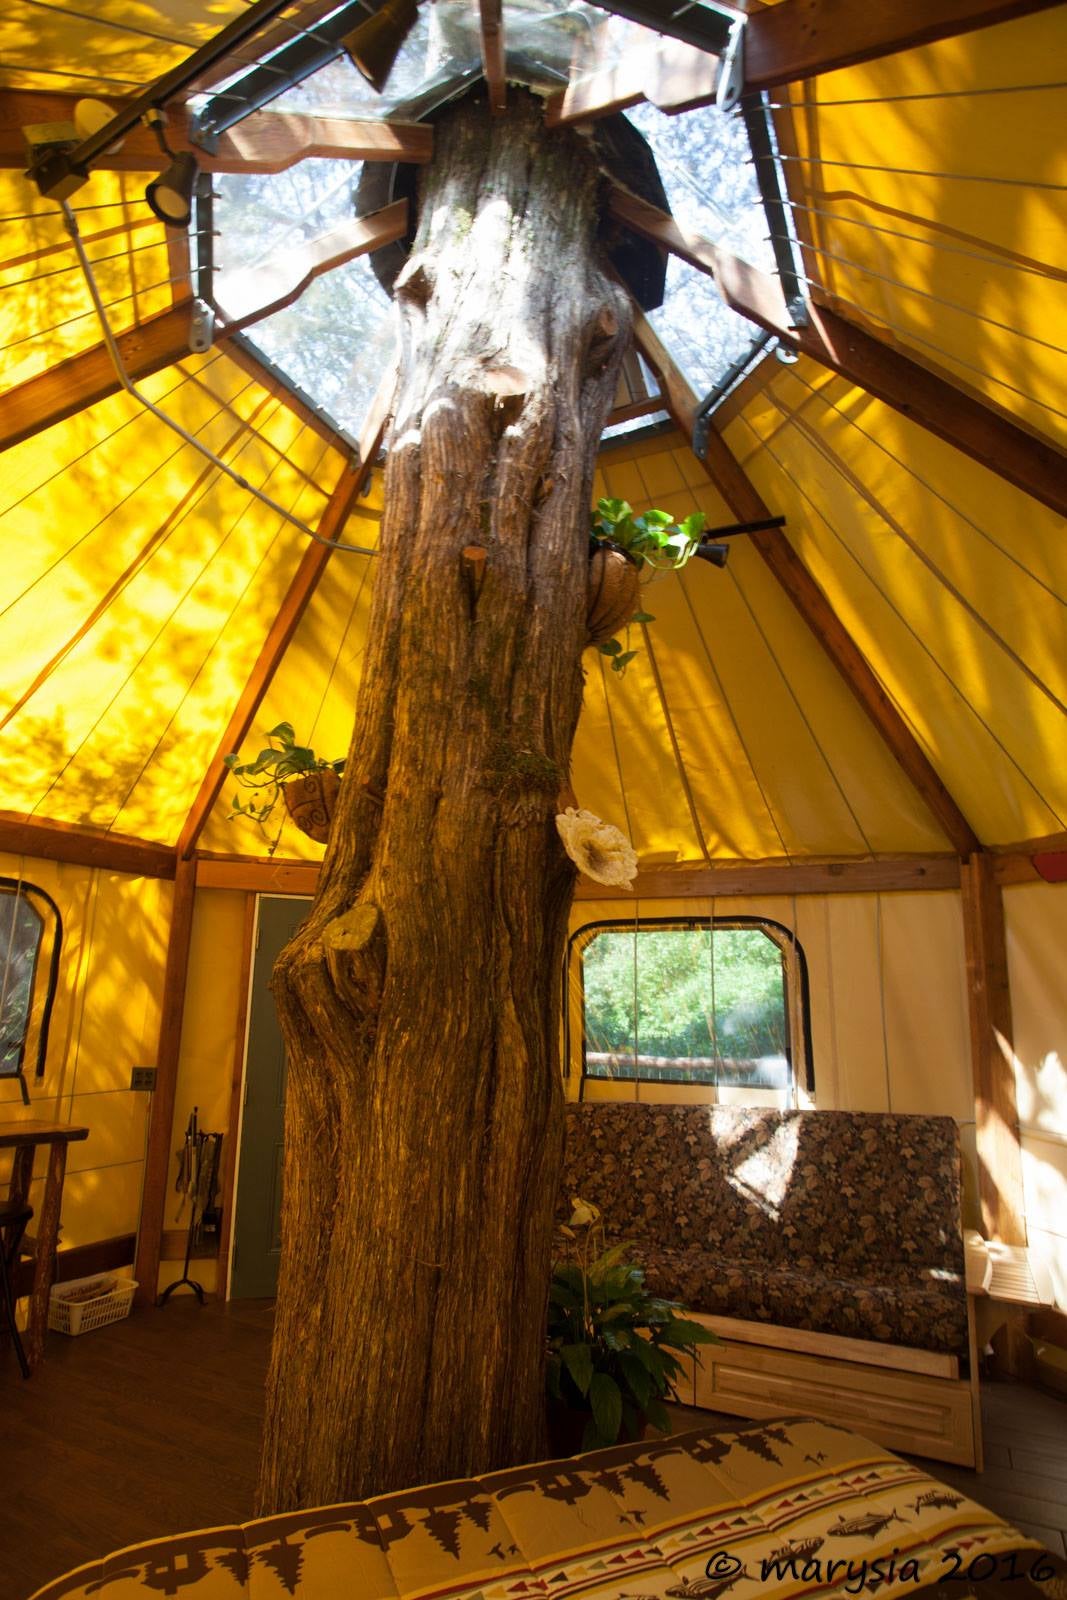 Glamping in the treehouse yurt